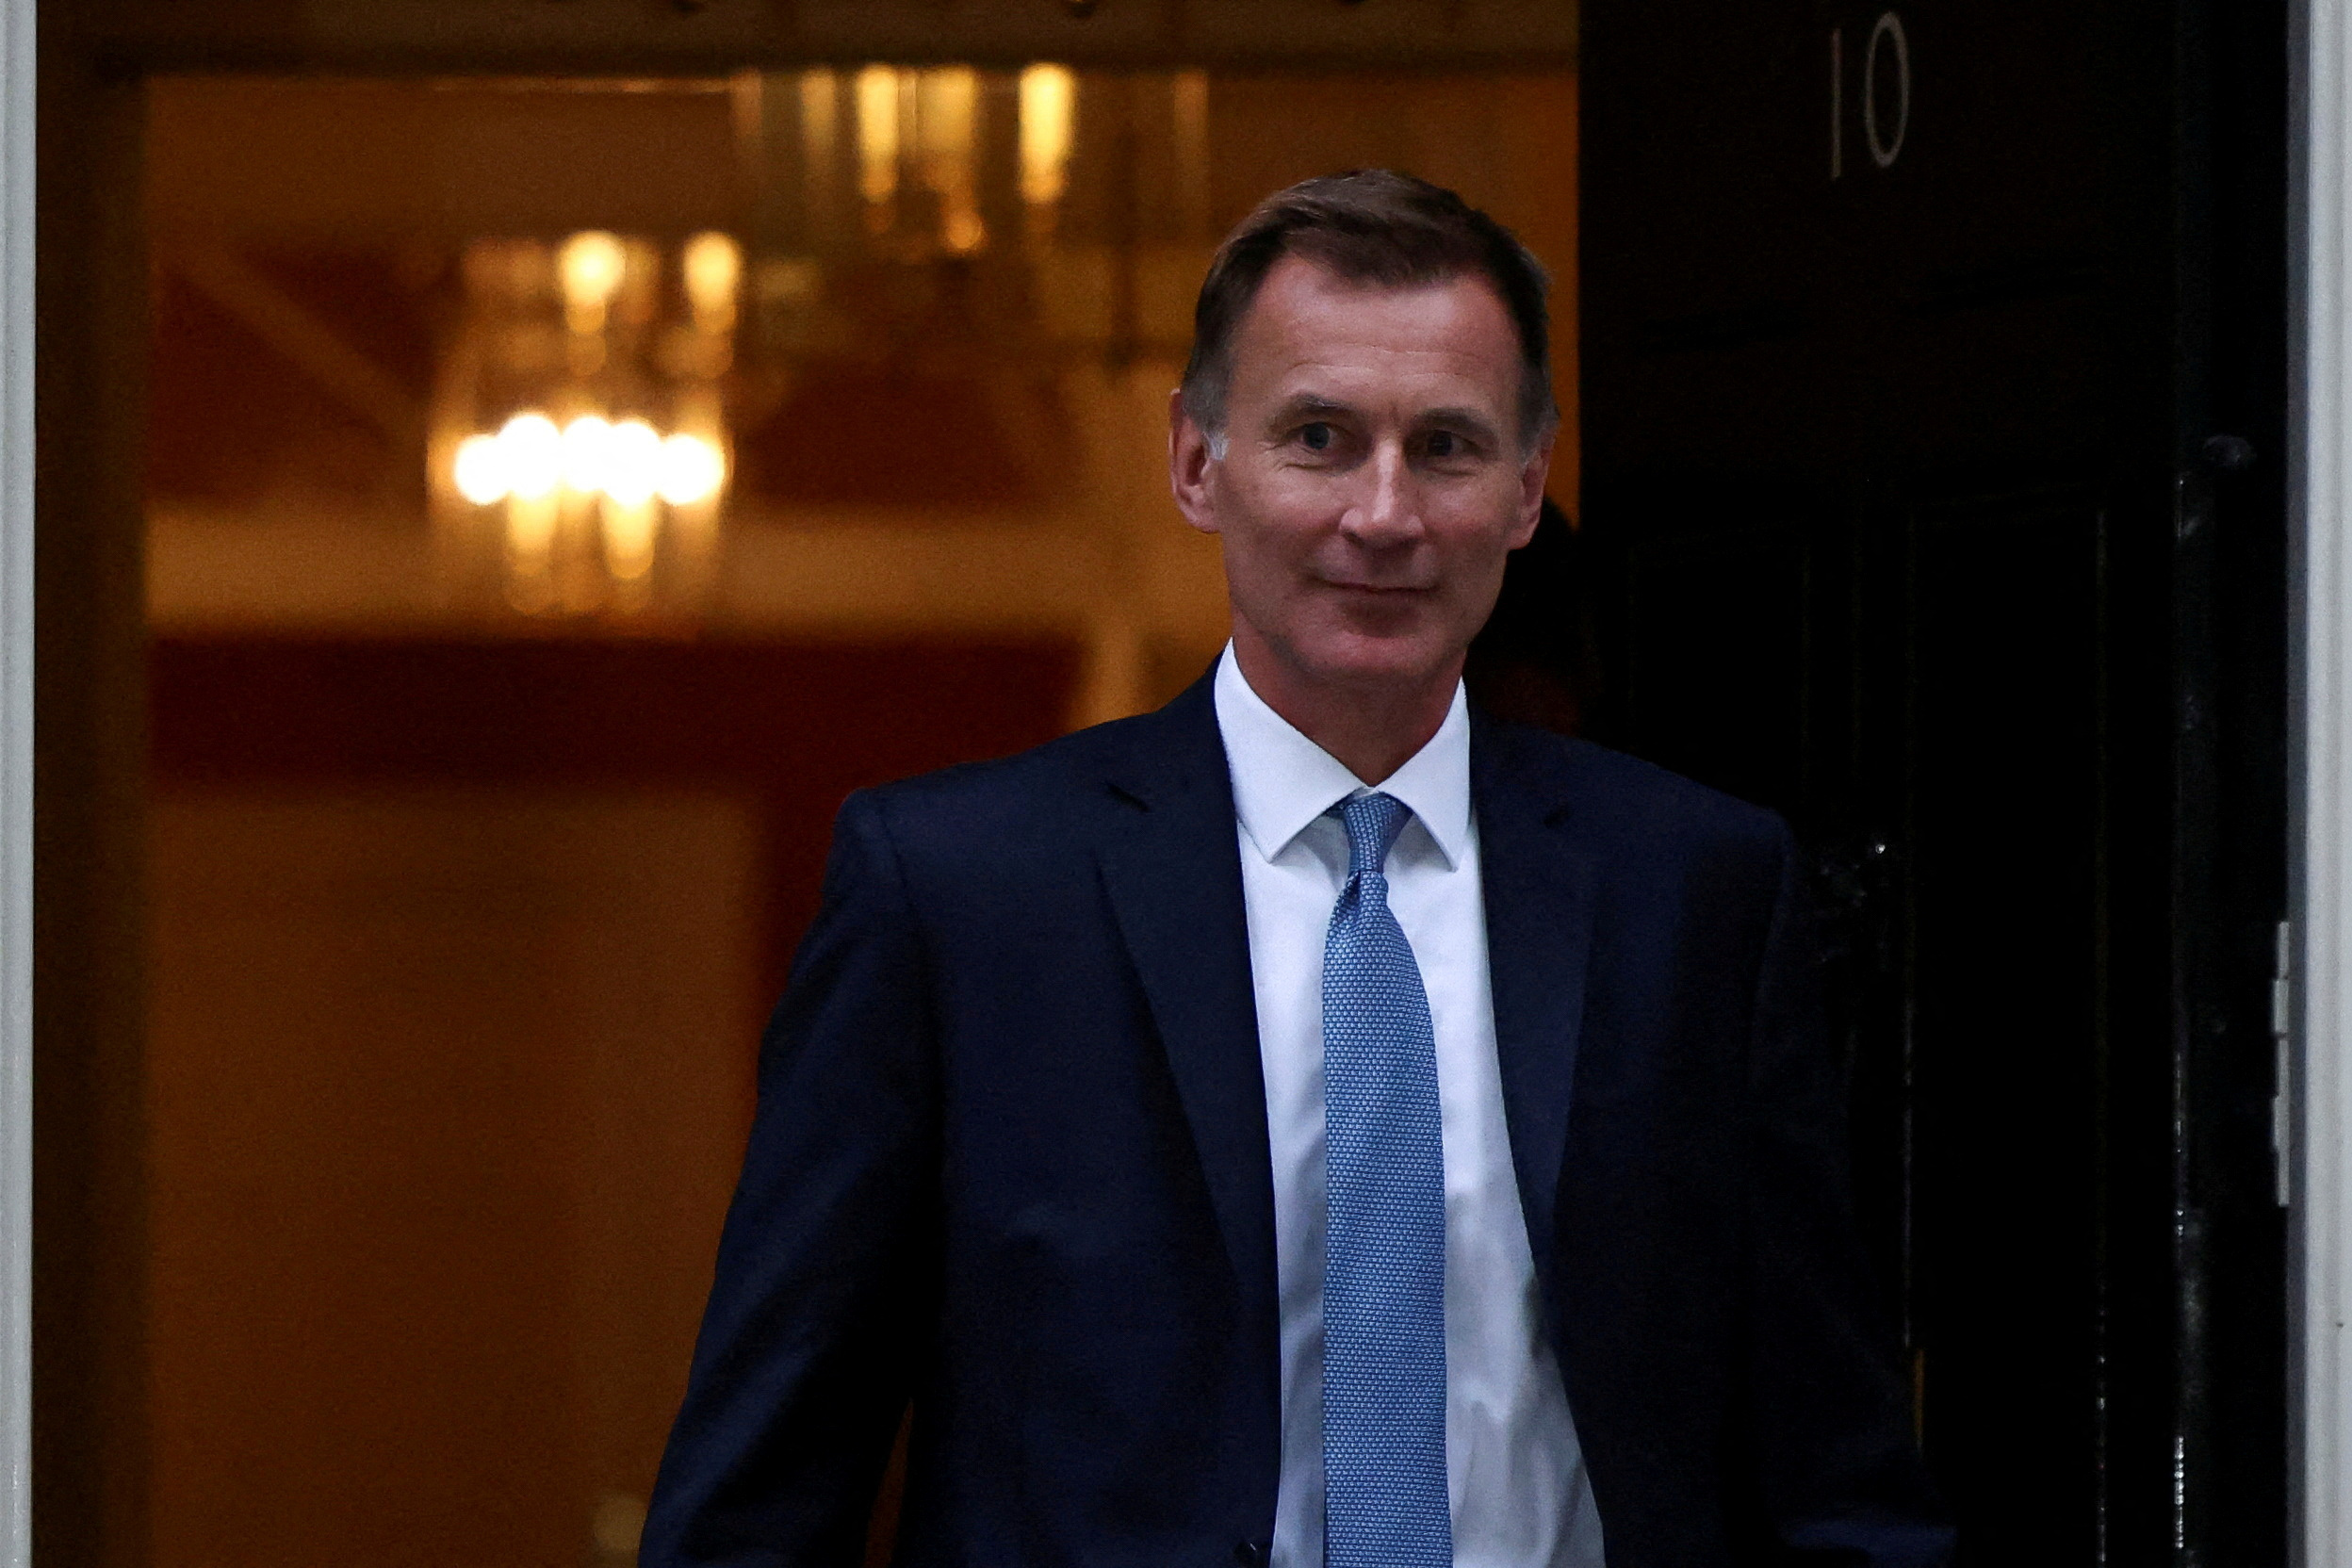 New Chancellor of the Exchequer Jeremy Hunt leaves 10 Downing Street in London, the seat of the UK government (REUTERS/Henry Nicholls)